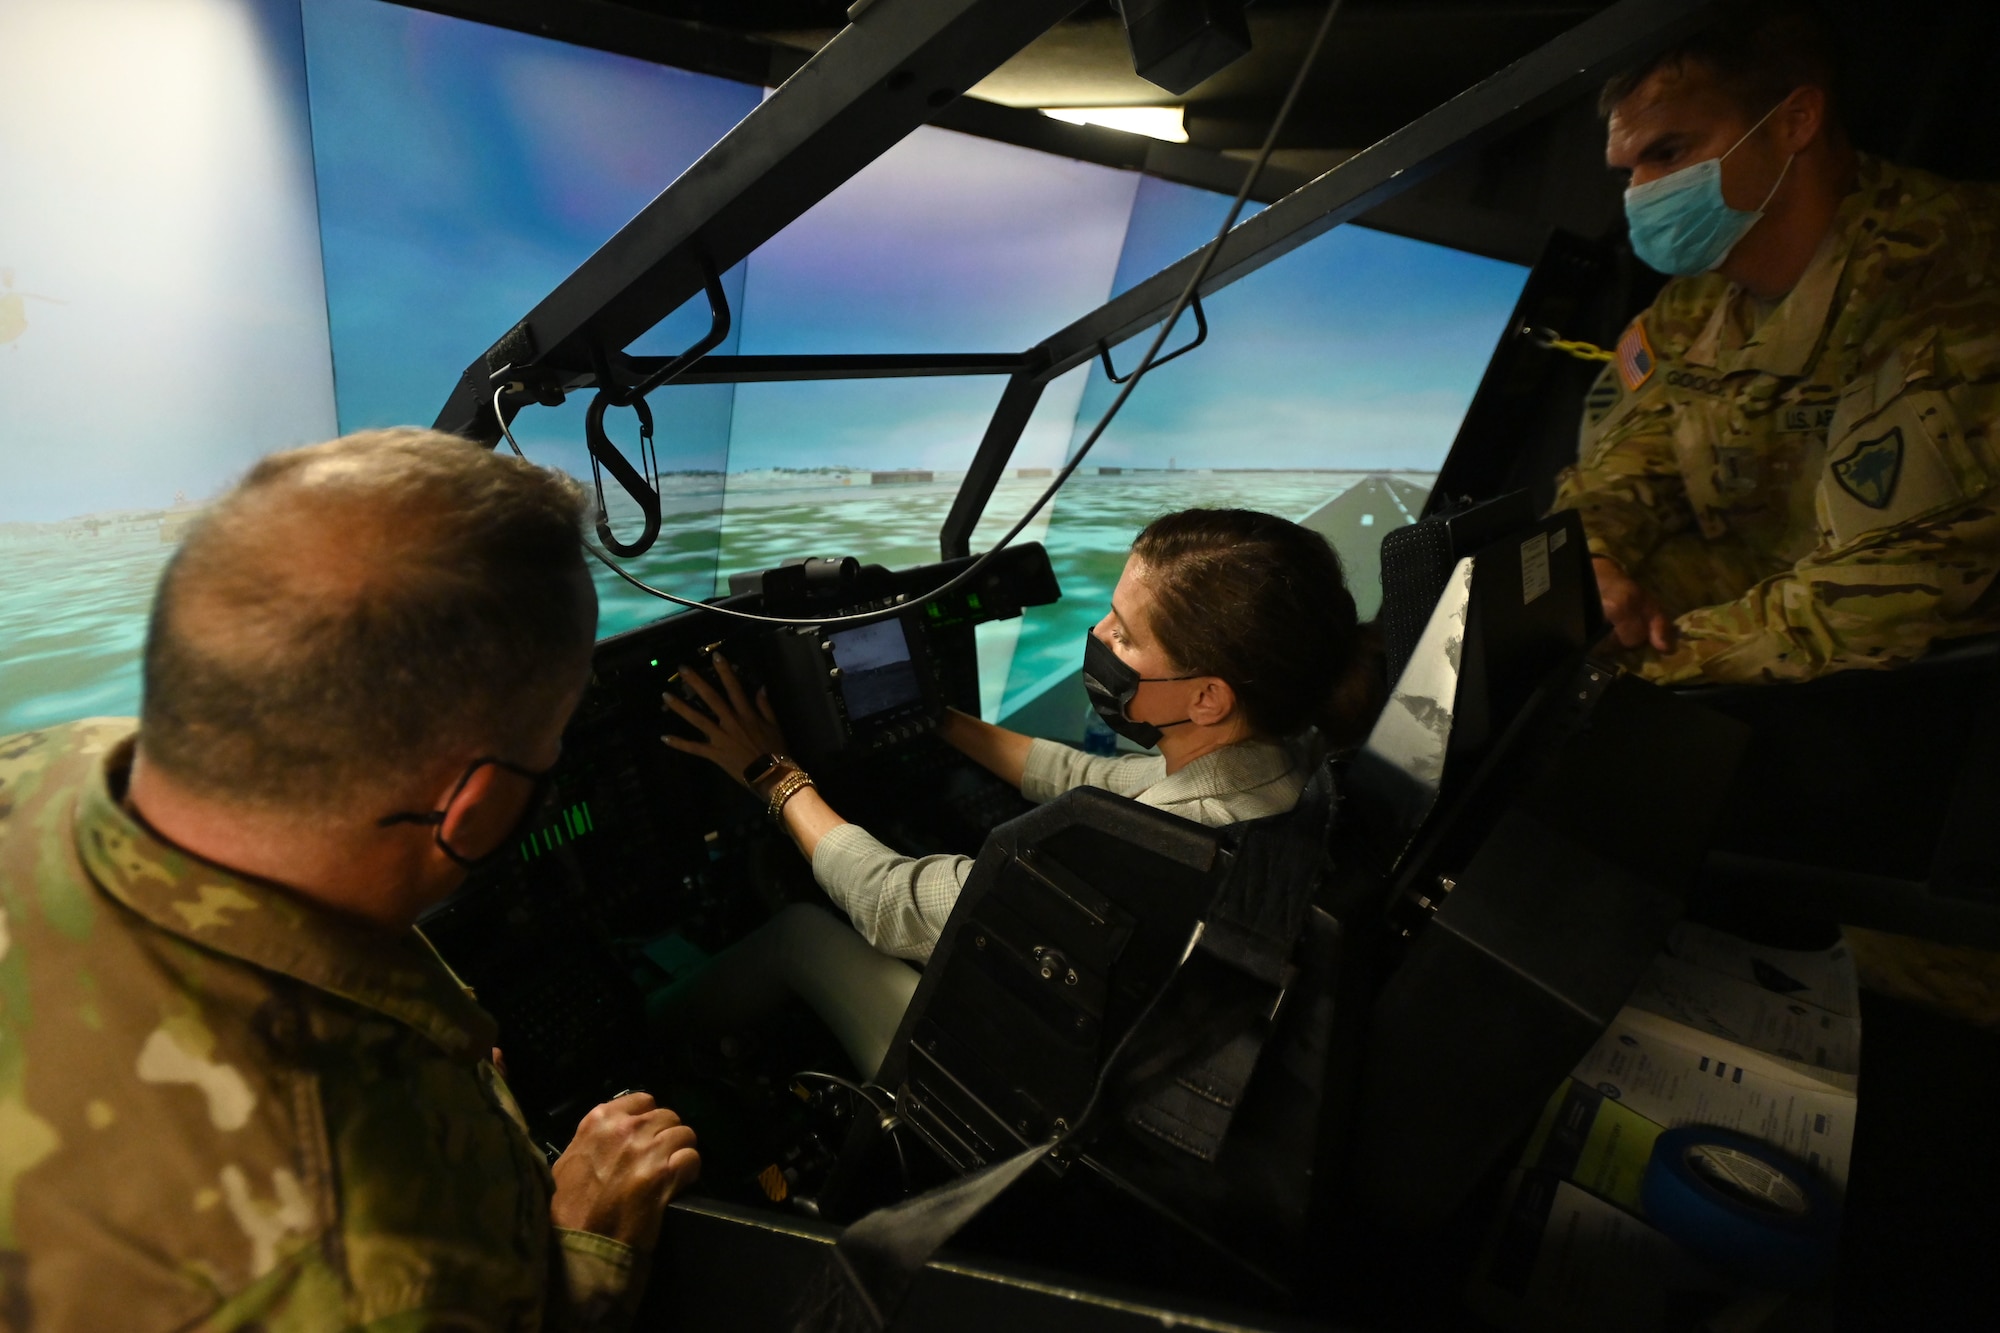 U.S. Rep. Nancy Mace from Charleston, South Carolina receives an in-flight demonstration of the AH-64 Apache helicopter simulator at the South Carolina Army National Guard’s aviation facility located at McEntire Joint National Guard Base, South Carolina Aug. 19, 2021. U.S. Army Col. John McElveen, 59th Troop Command commander, foreground, and U.S. Army Chief Warrant Officer 4 Joel Gooch, 1-151st Attack Reconnaissance Battalion pilot, offer instruction on the flight characteristics of the Apache while Mace operates the flight controls. The purpose of her visit is to meet with South Carolina National Guard leadership to discuss the current state of the South Carolina National Guard and future endeavors for the organization as well as a familiarization of McEntire Joint National Guard Base and the capabilities of the units housed there. (U.S. Air National Guard photo by Senior Master Sgt. Edward Snyder, 169th Fighter Wing Public Affairs)